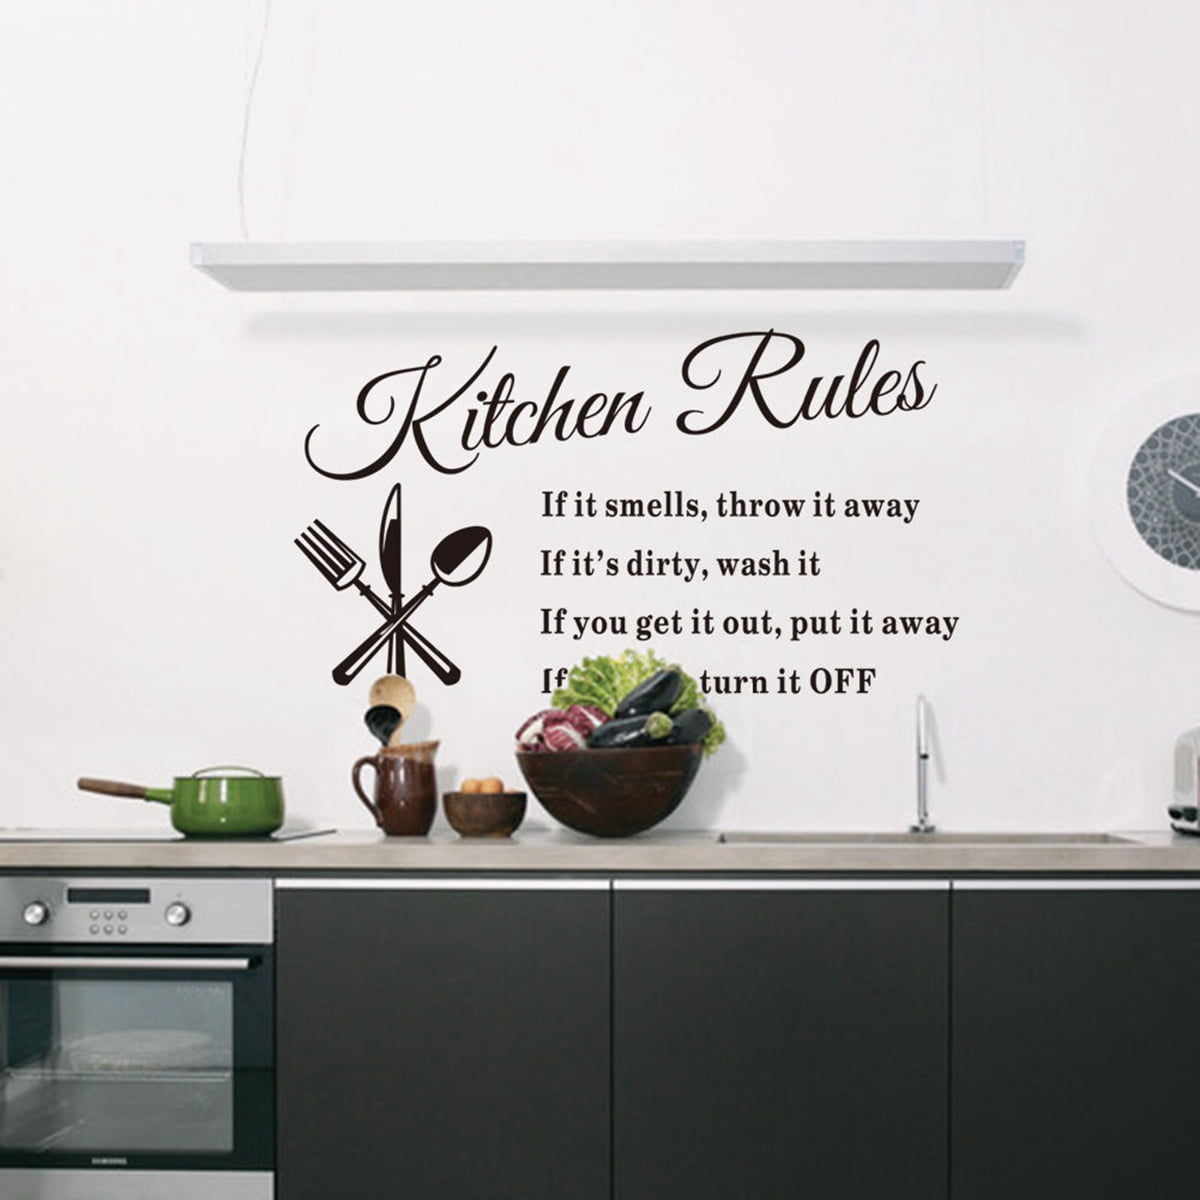 Coffee Wall Sticker Decor Kitchen Home Decals Quotes Vinyl Mural Removable Art 